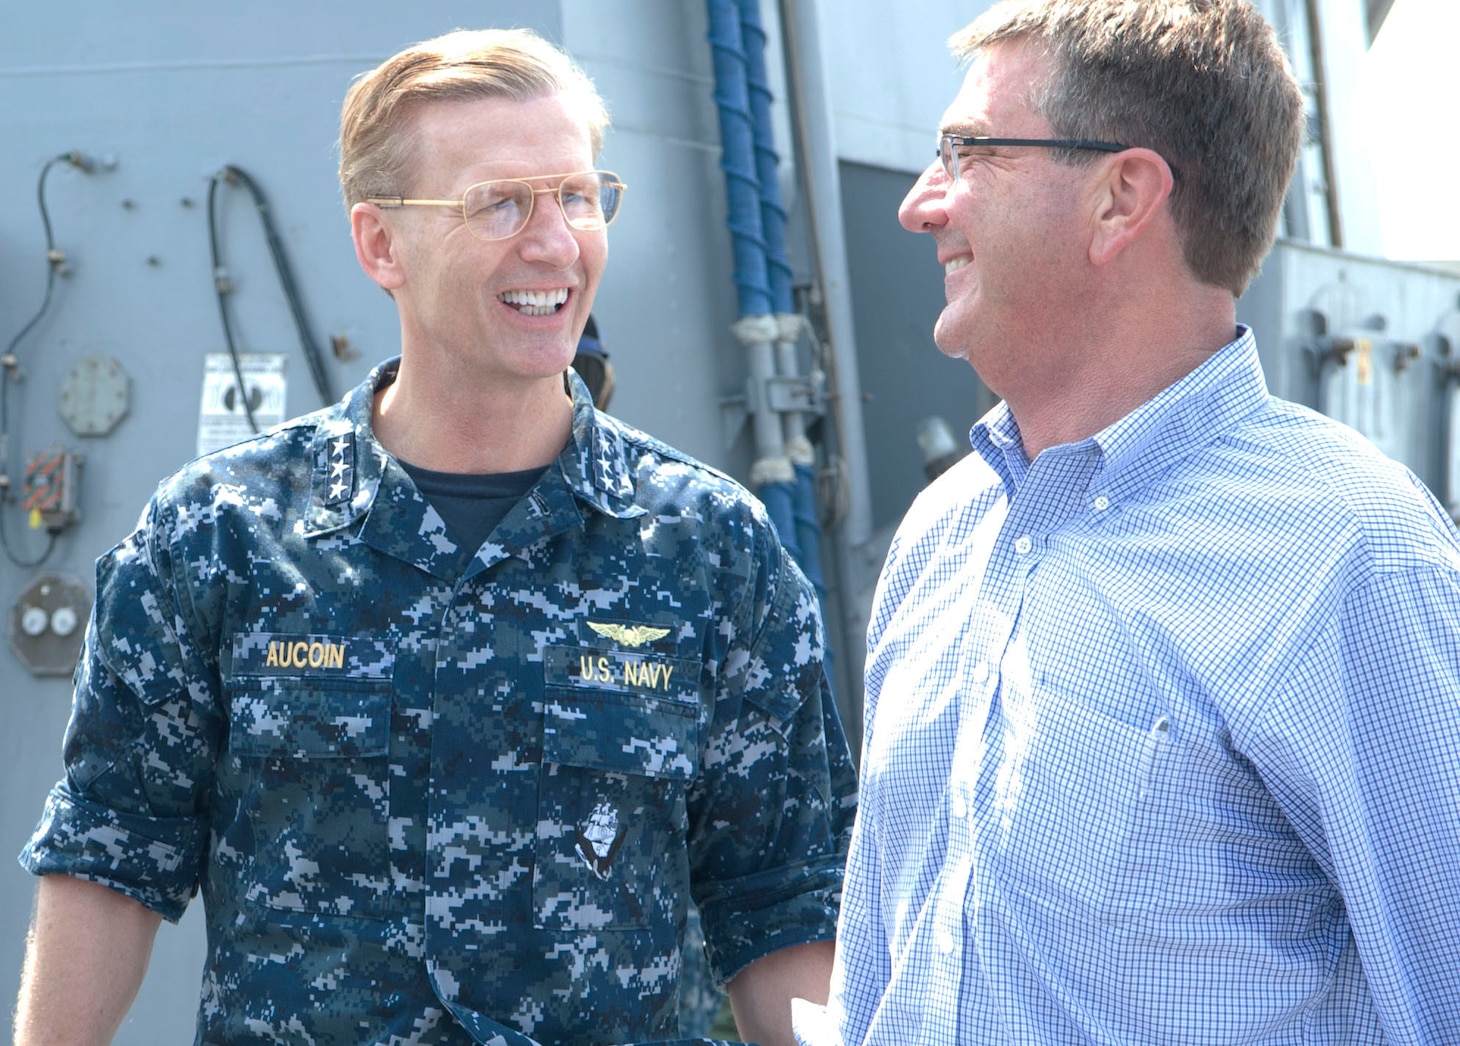 160411-N-IE405-099 GOA, India (April 11, 2016) Commander, U.S. 7th Fleet Vice Adm. Joseph Aucoin welcomes Secretary of Defense (SECDEF) Ashton Carter aboard USS Blue Ridge. Blue Ridge is currently on patrol in the Indo-Asia-Pacific area of operation to build partnerships for the security and stability of the region. (U.S. Navy photo by Mass Communication Specialist 2nd Class Indra Bosko/Released)